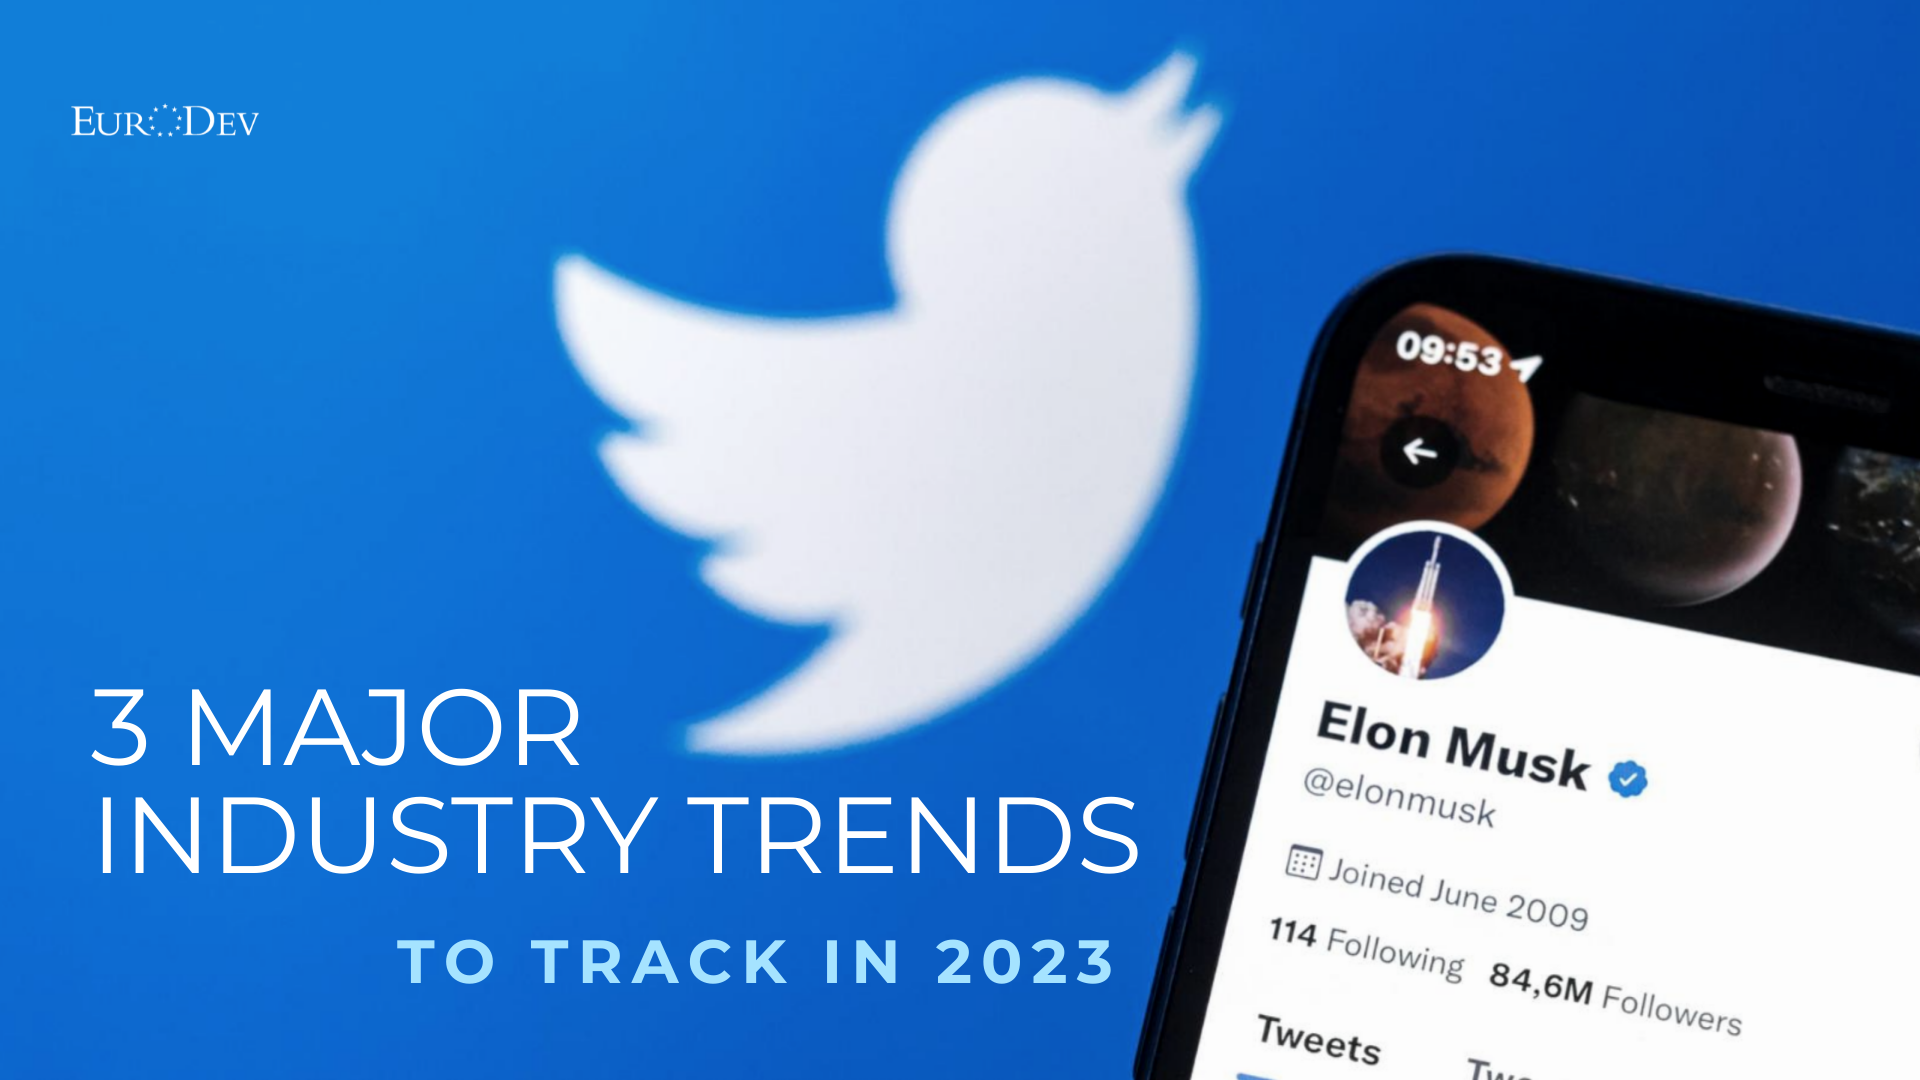 Elon Musk, Twitter, industry trends 2023, business trends 2023, manufacturing 2023